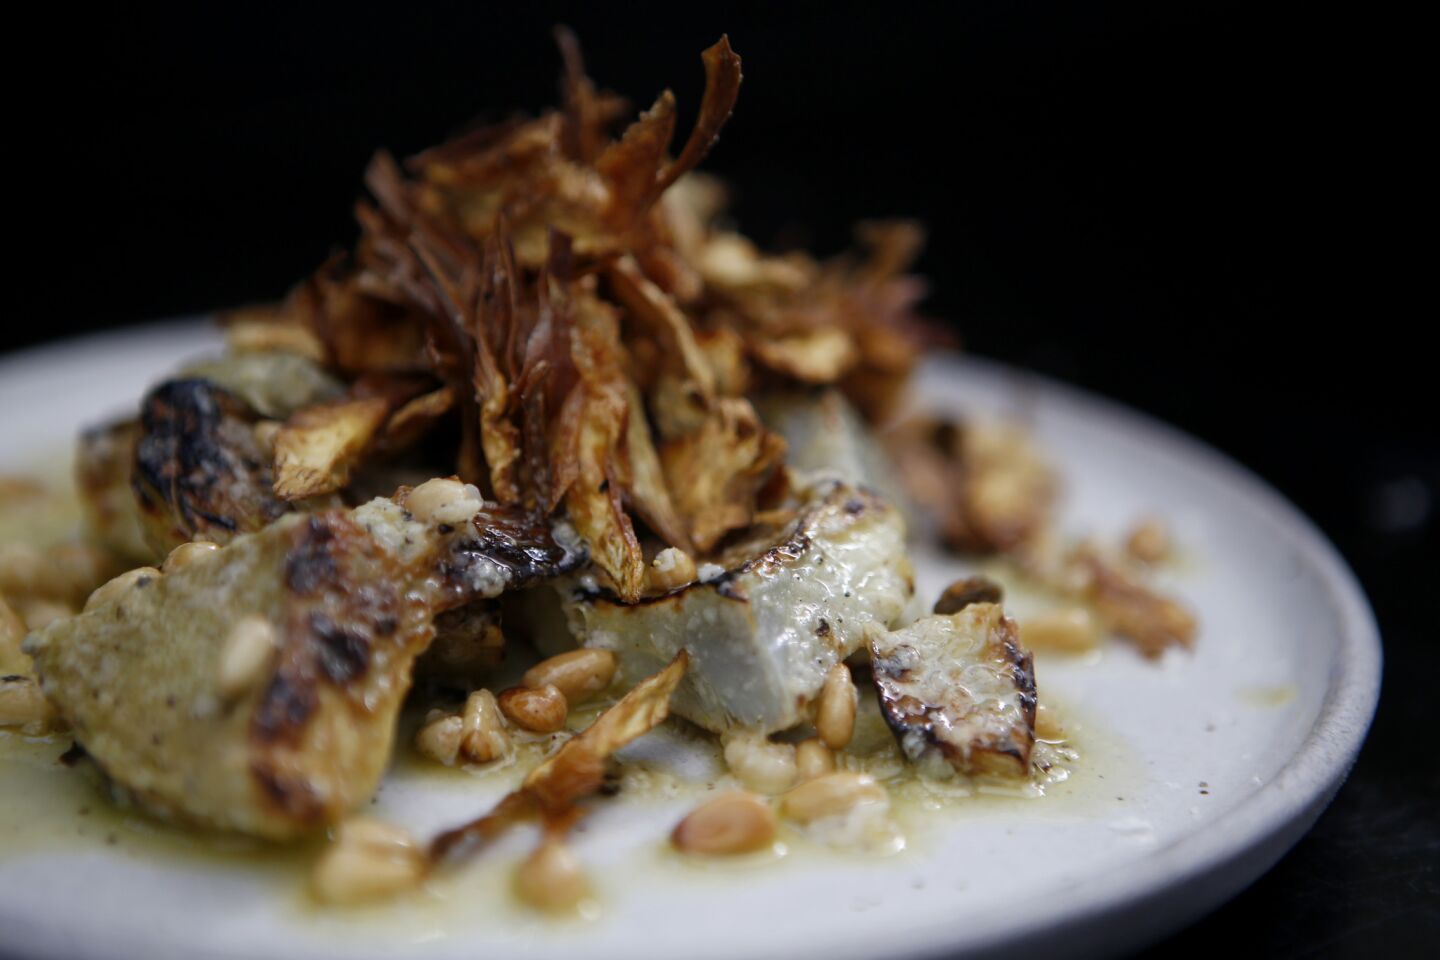 Charred artichoke hearts with fried baby artichokes, toasted pine nut, parmigiano and lemon citronette.